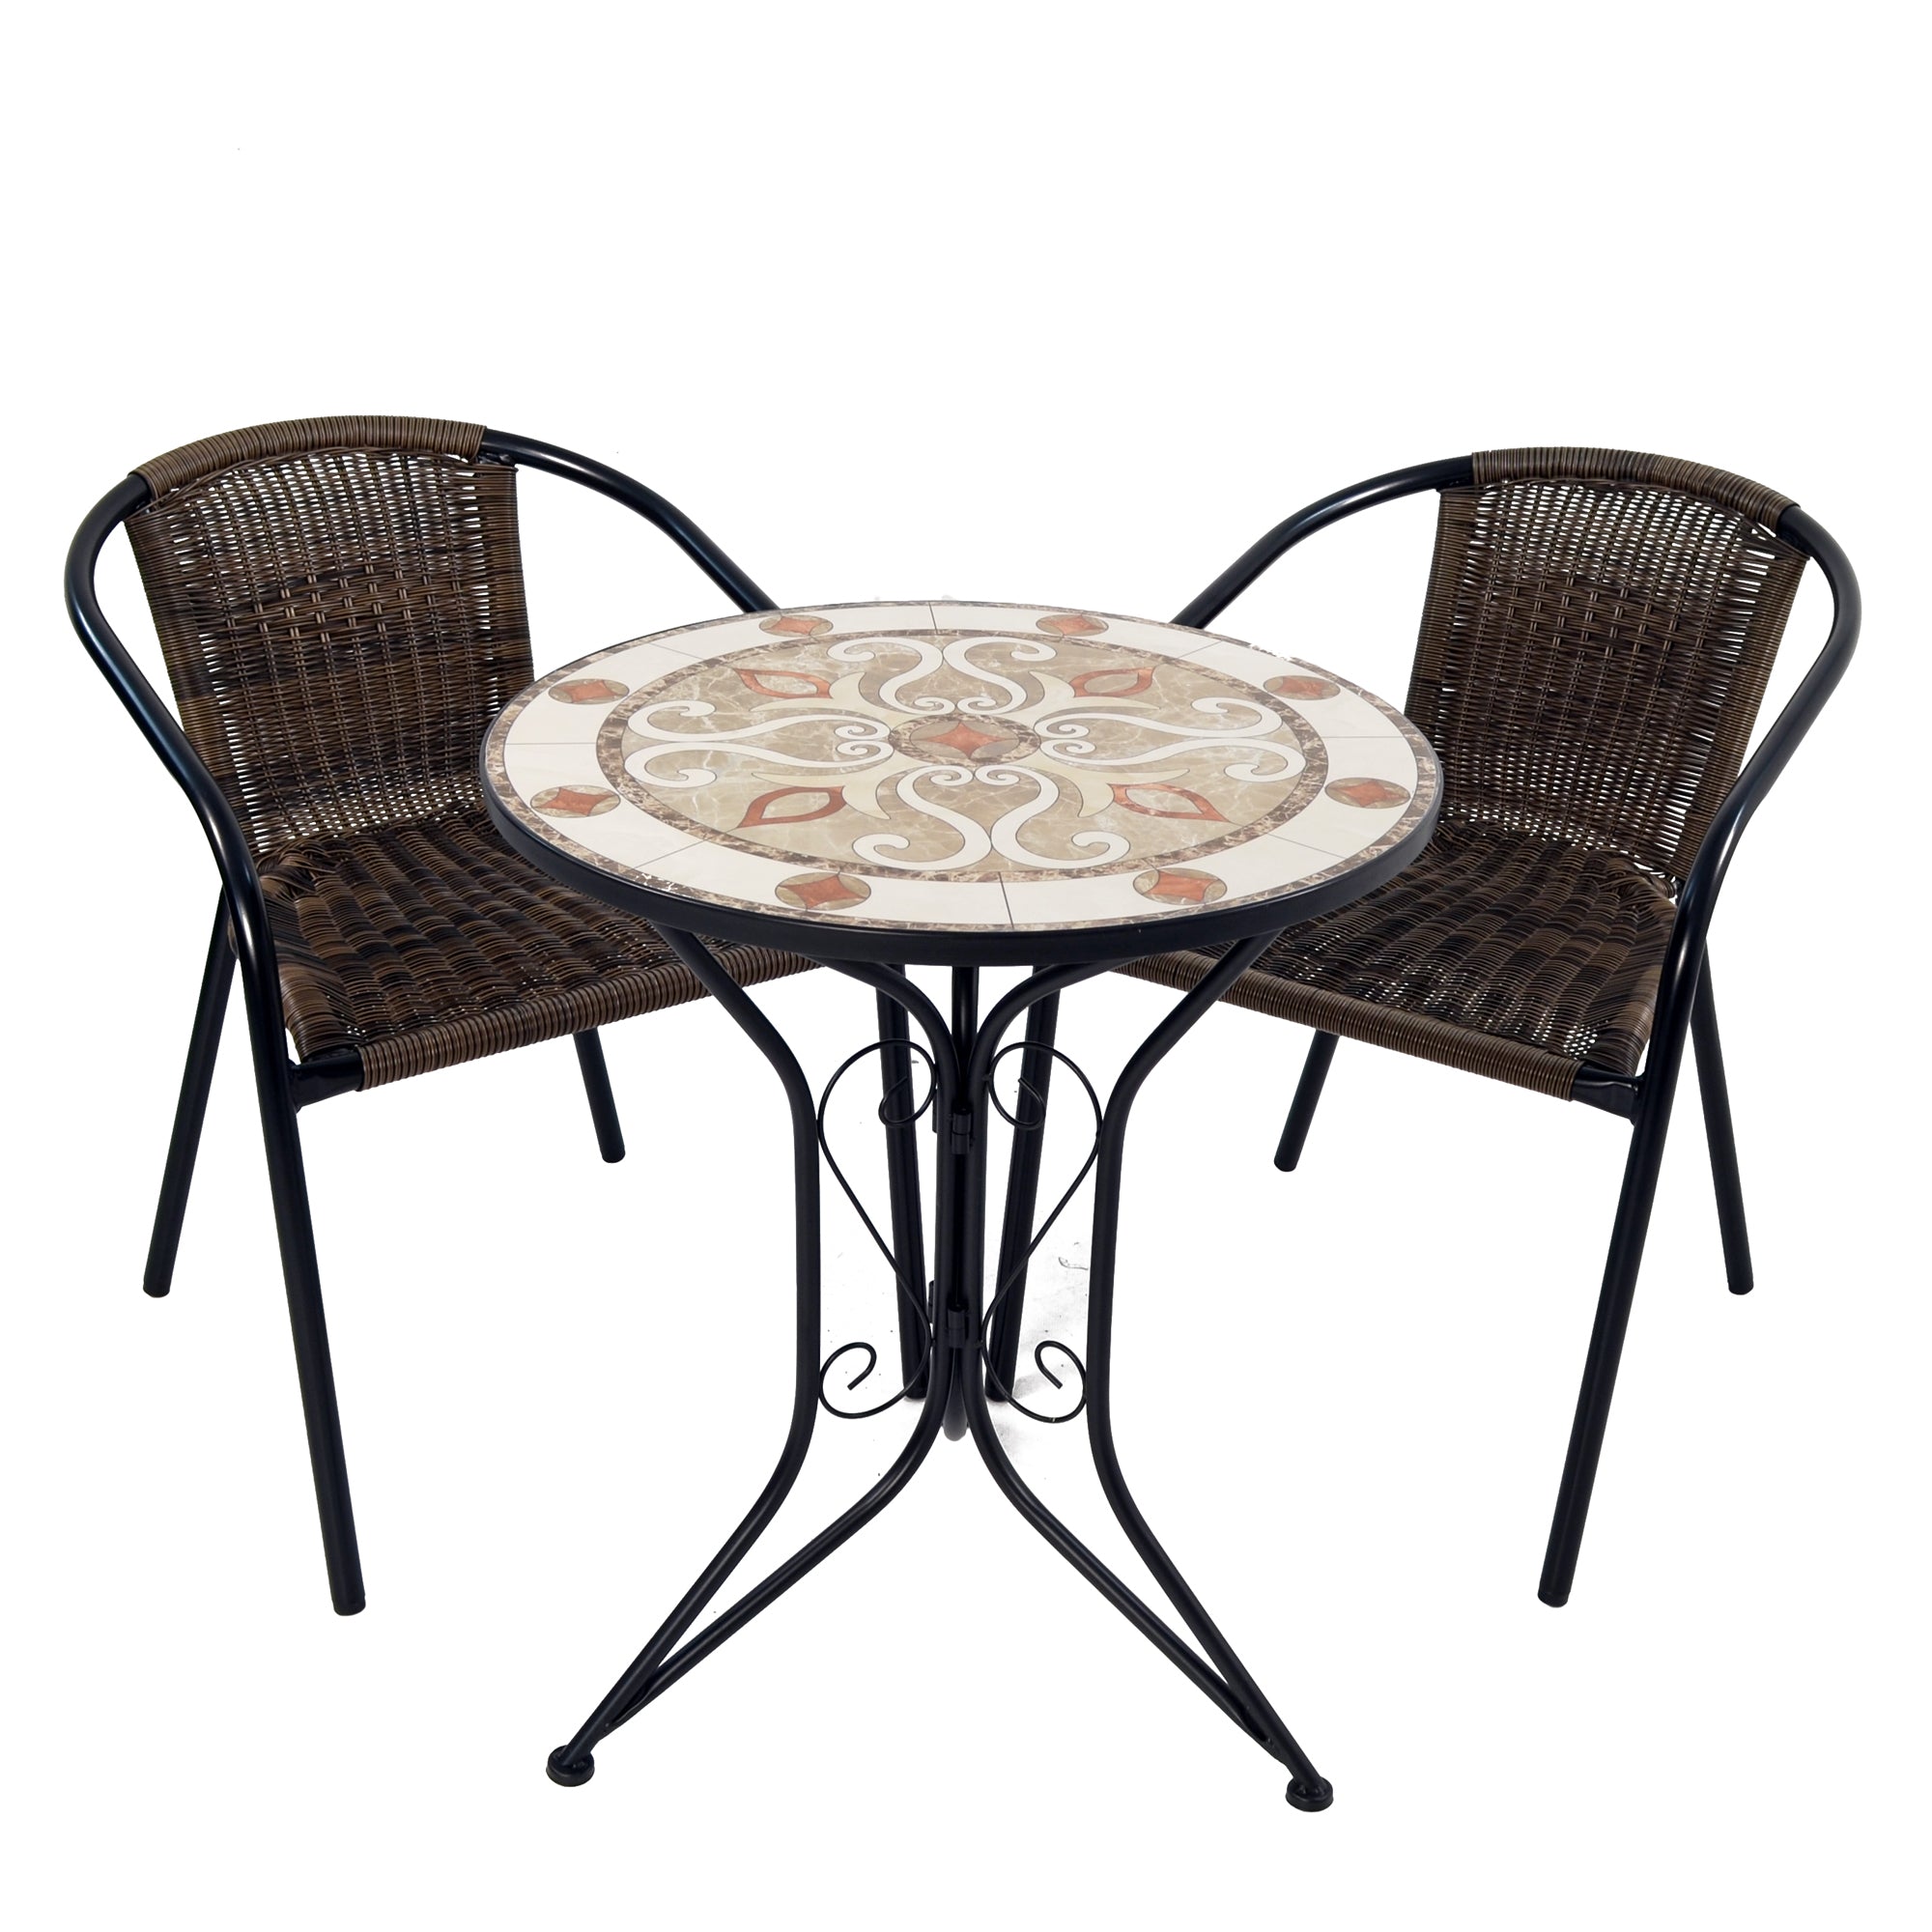 Summer Terrace Estoril Bistro Garden Table Set with 2 San Remo Chairs Dining Sets Summer Terrace   